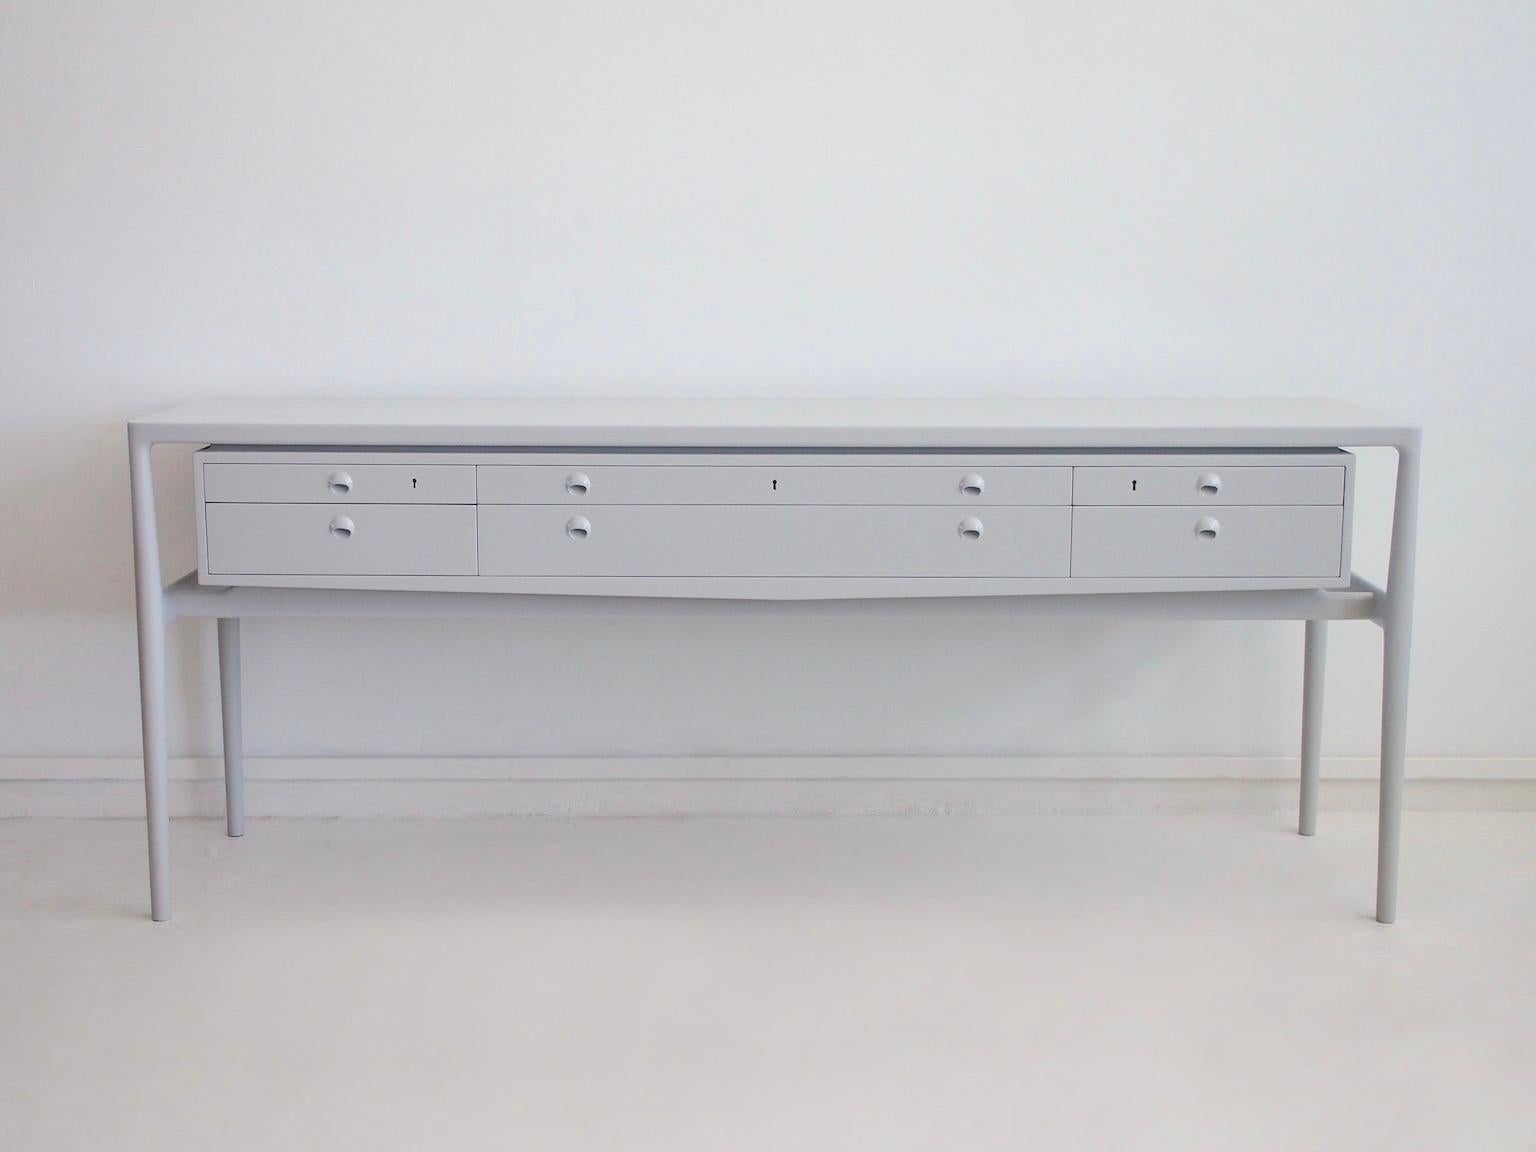 Elegant sideboard designed by Helge Vestergaard-Jensen circa 1955 and produced by master cabinetmaker Peder Pedersen. Made of veneered wood, unoriginal light grey color paint of later date. The console has recently been repainted. Very slightly